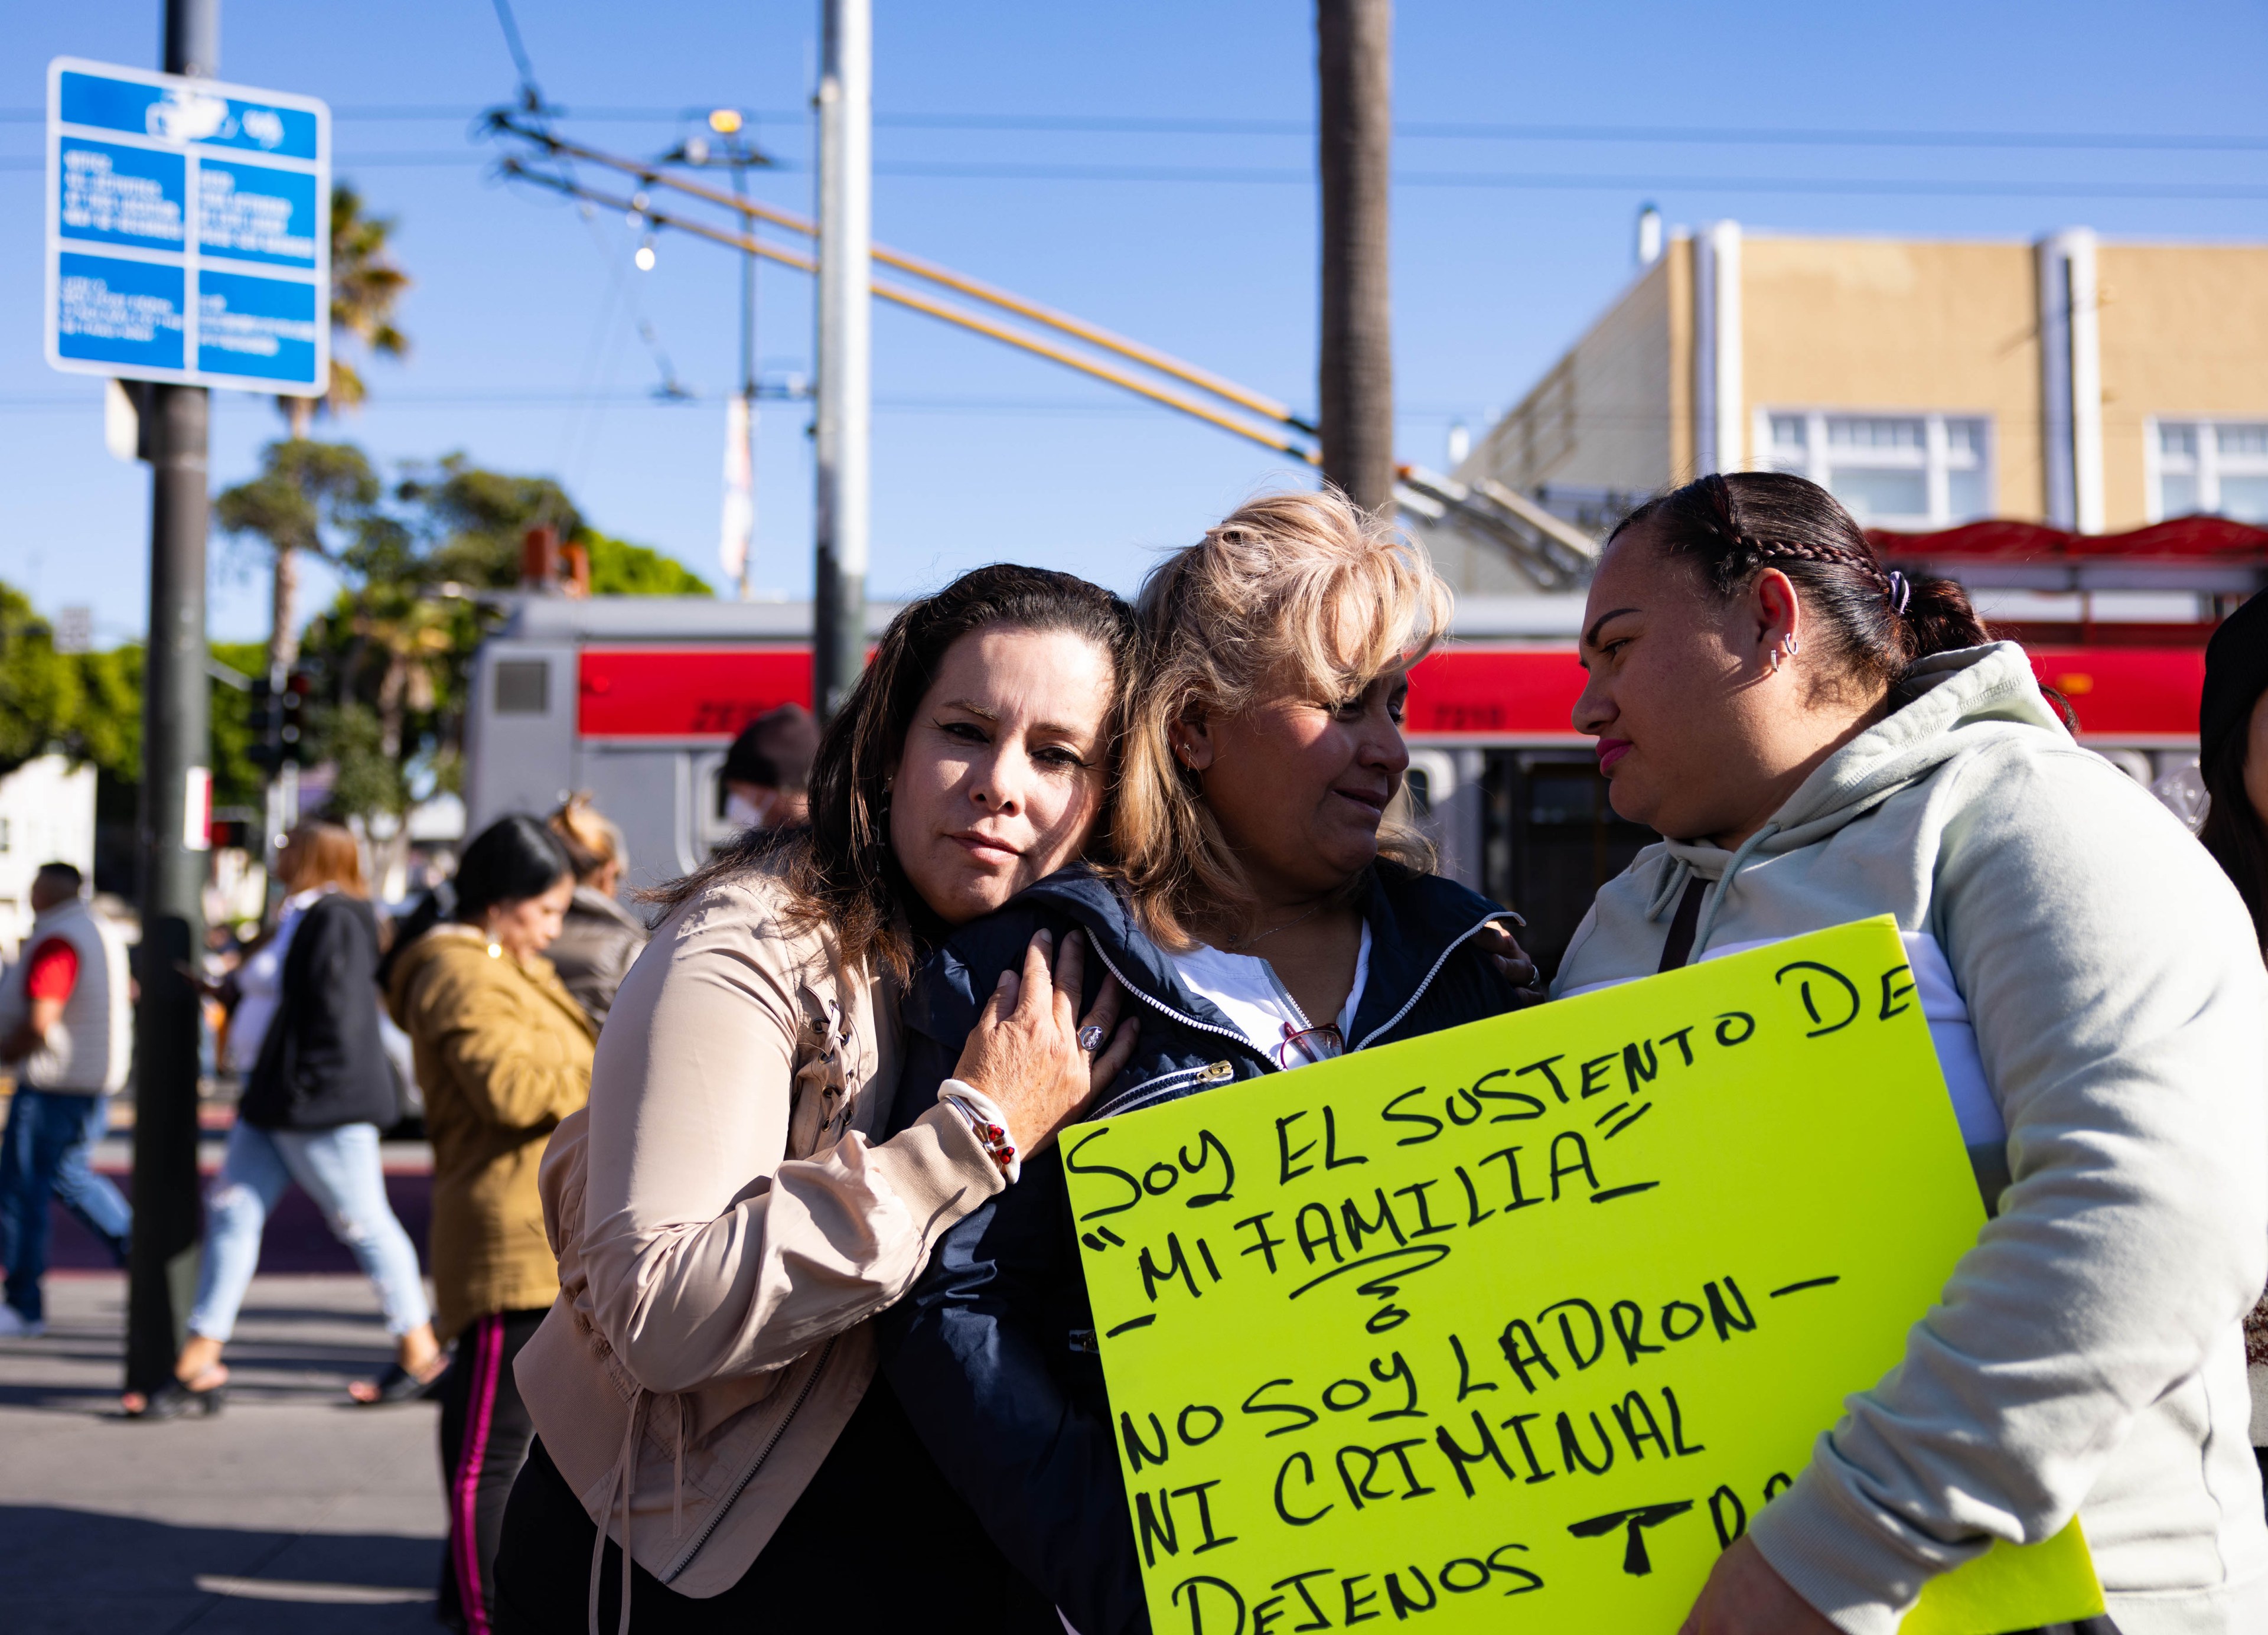 3 women comforting one another with a sign that reads &quot;Soy el sustento De 'Mi Familia' - No Soy Ladon Ni Criminal ...&quot;